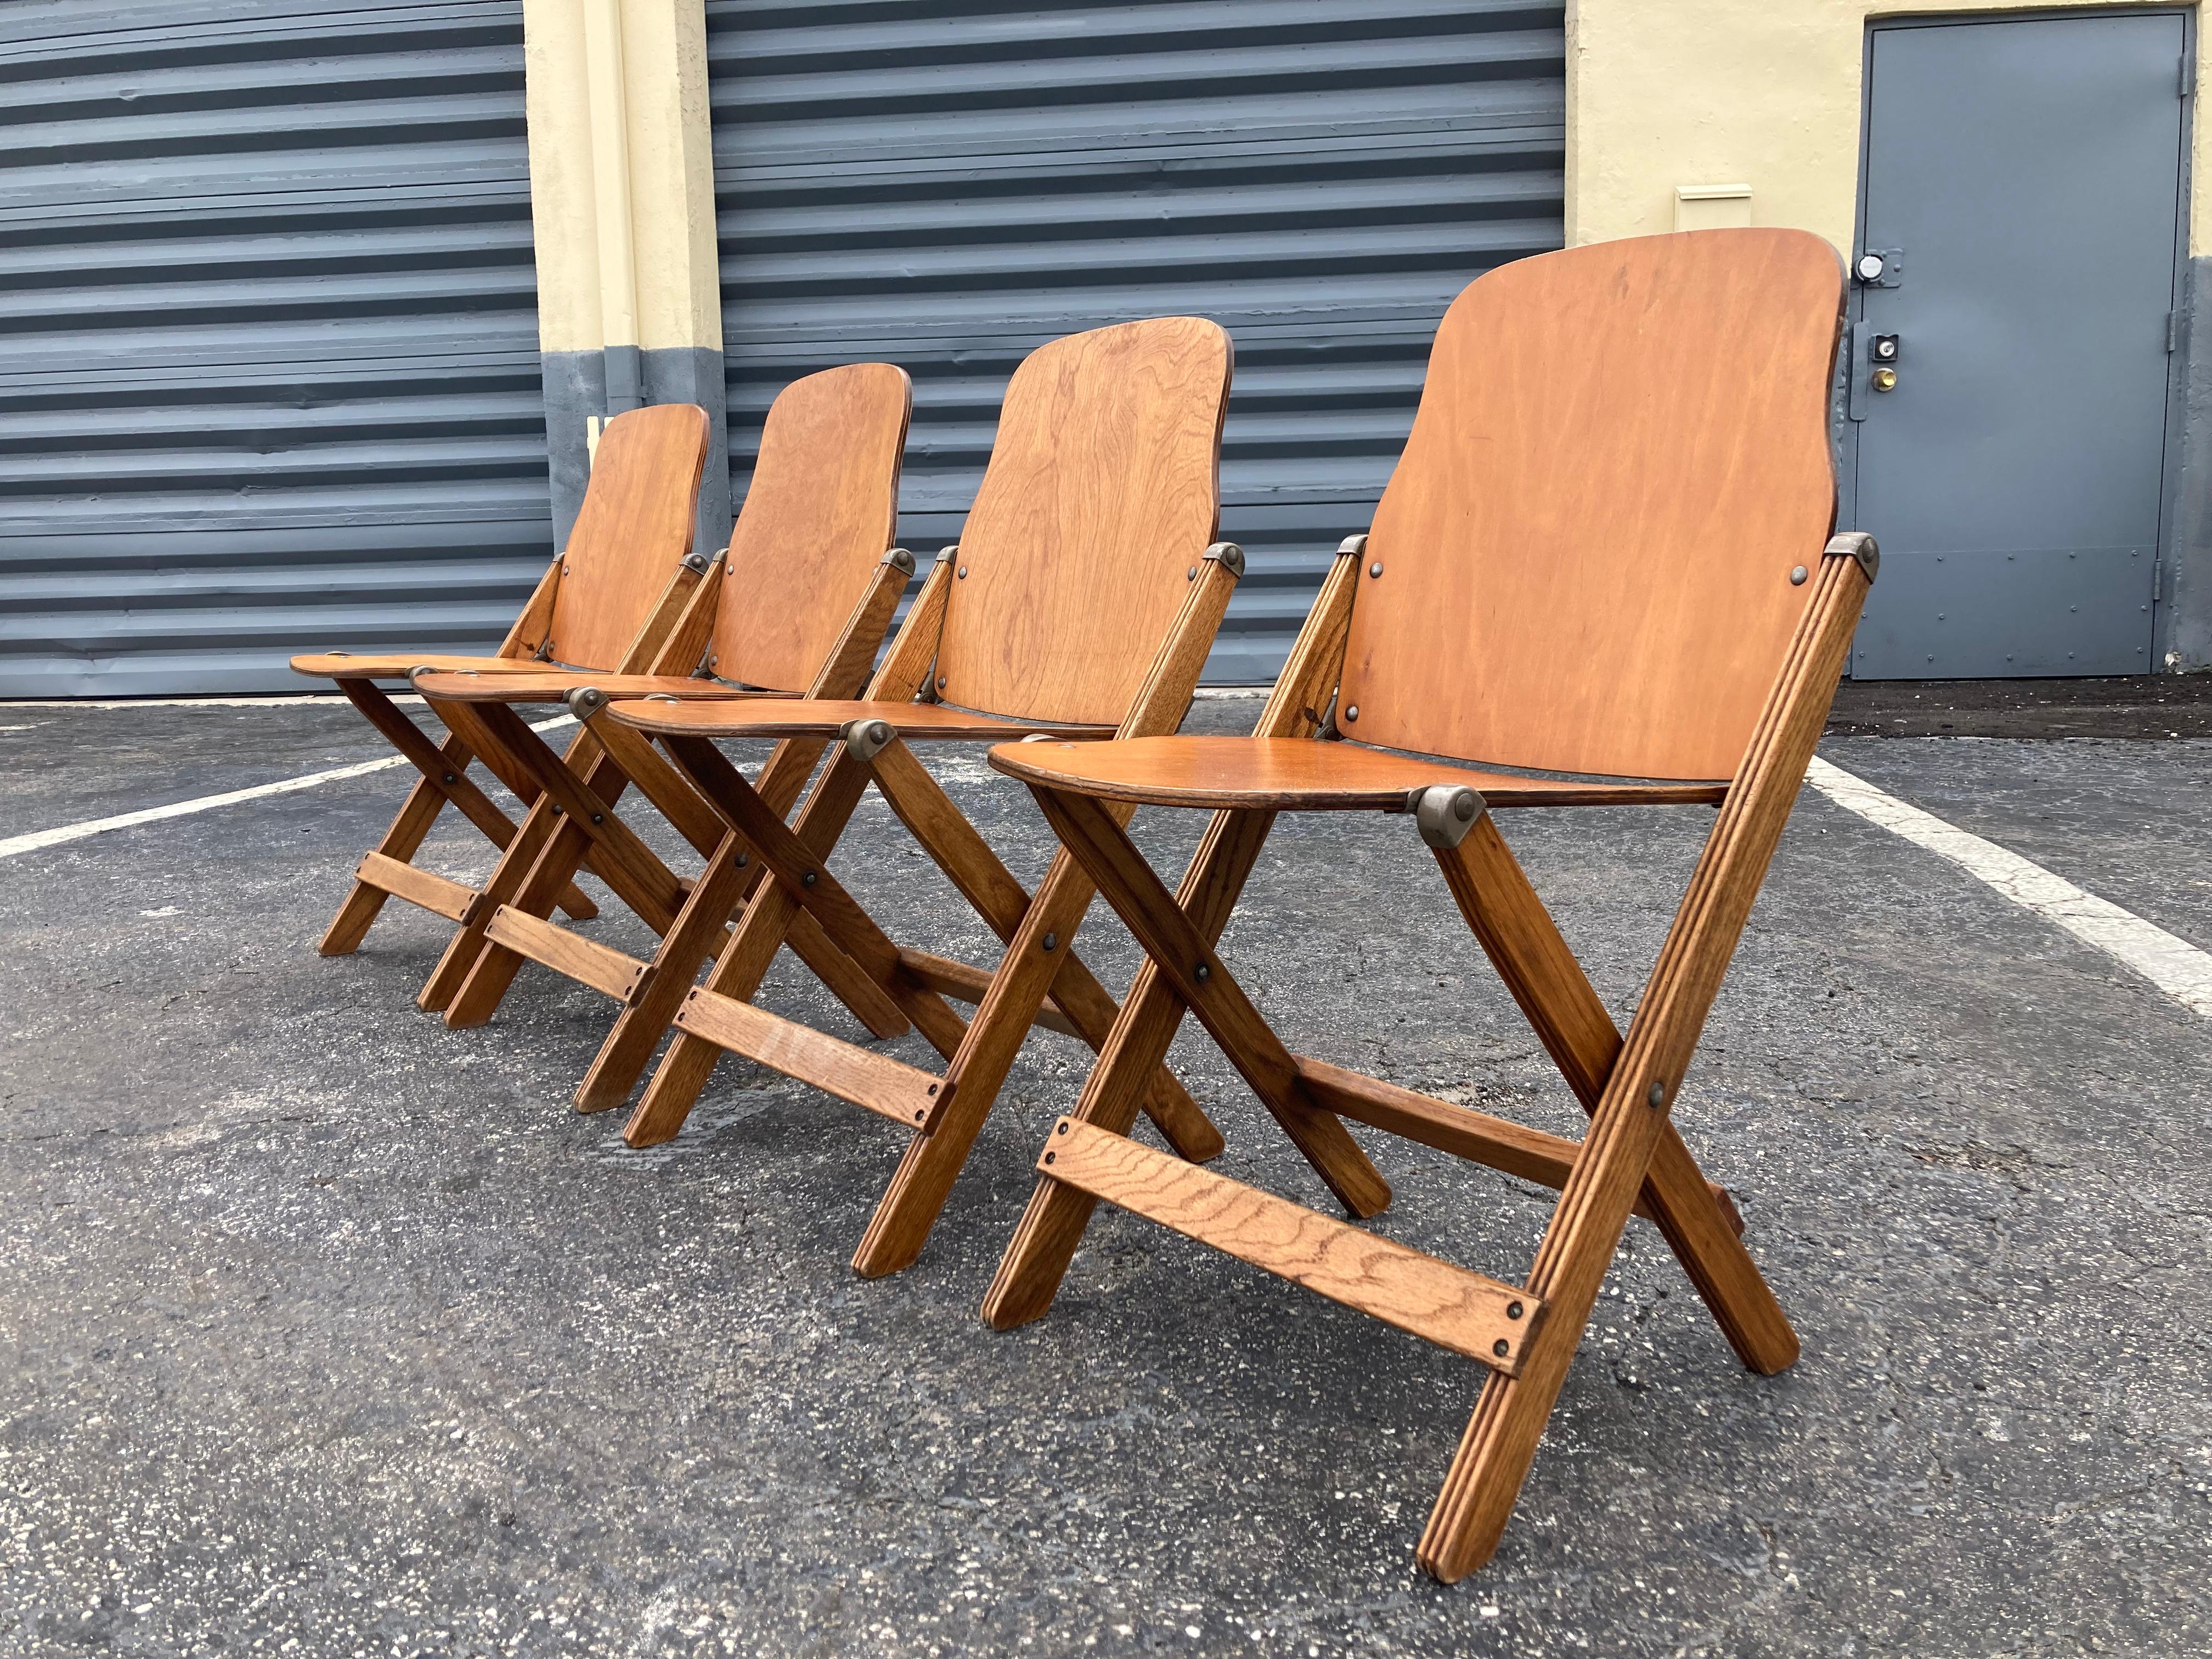 Great set of four vintage American folding chairs, great patina and look.